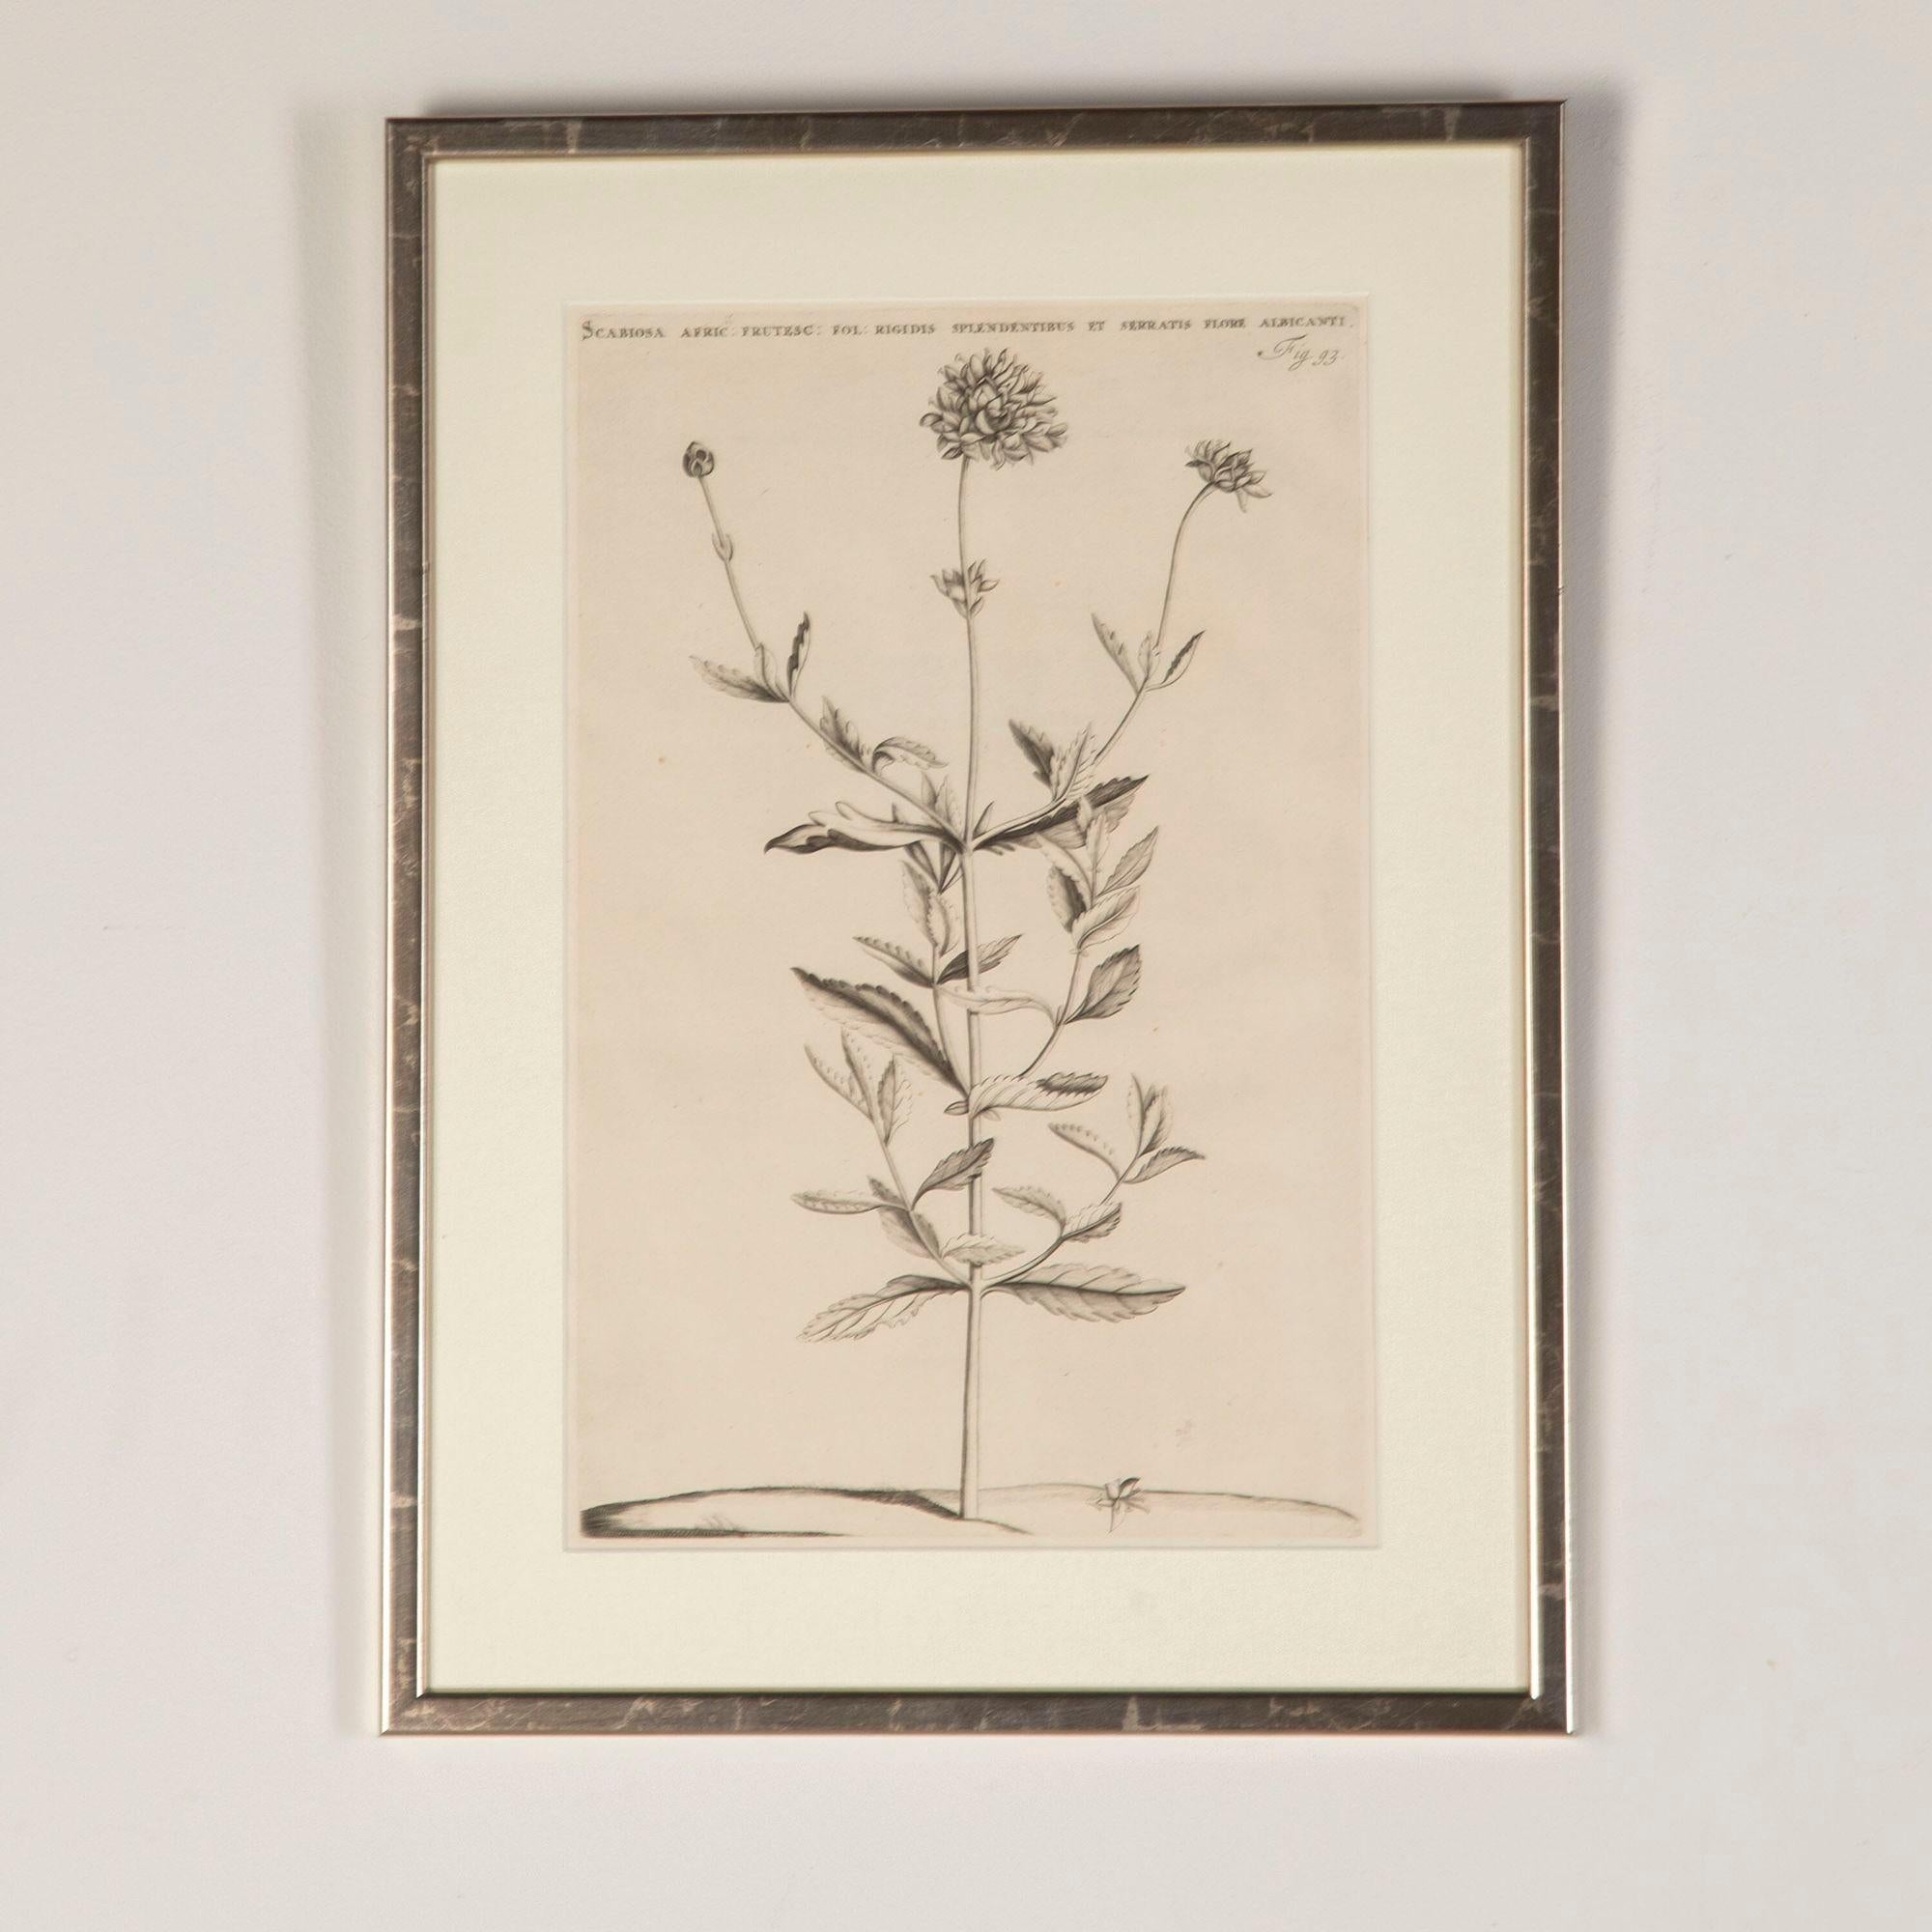 Beautiful set of six 17th century botanical engravings by Jan and Caspar Commelin.
Presented in silver frames with hessian mounts and AR70 Artglass for optimal clarity.
Jan Commelin (1629-1692) was the Director of the Amsterdam Physic Garden at a